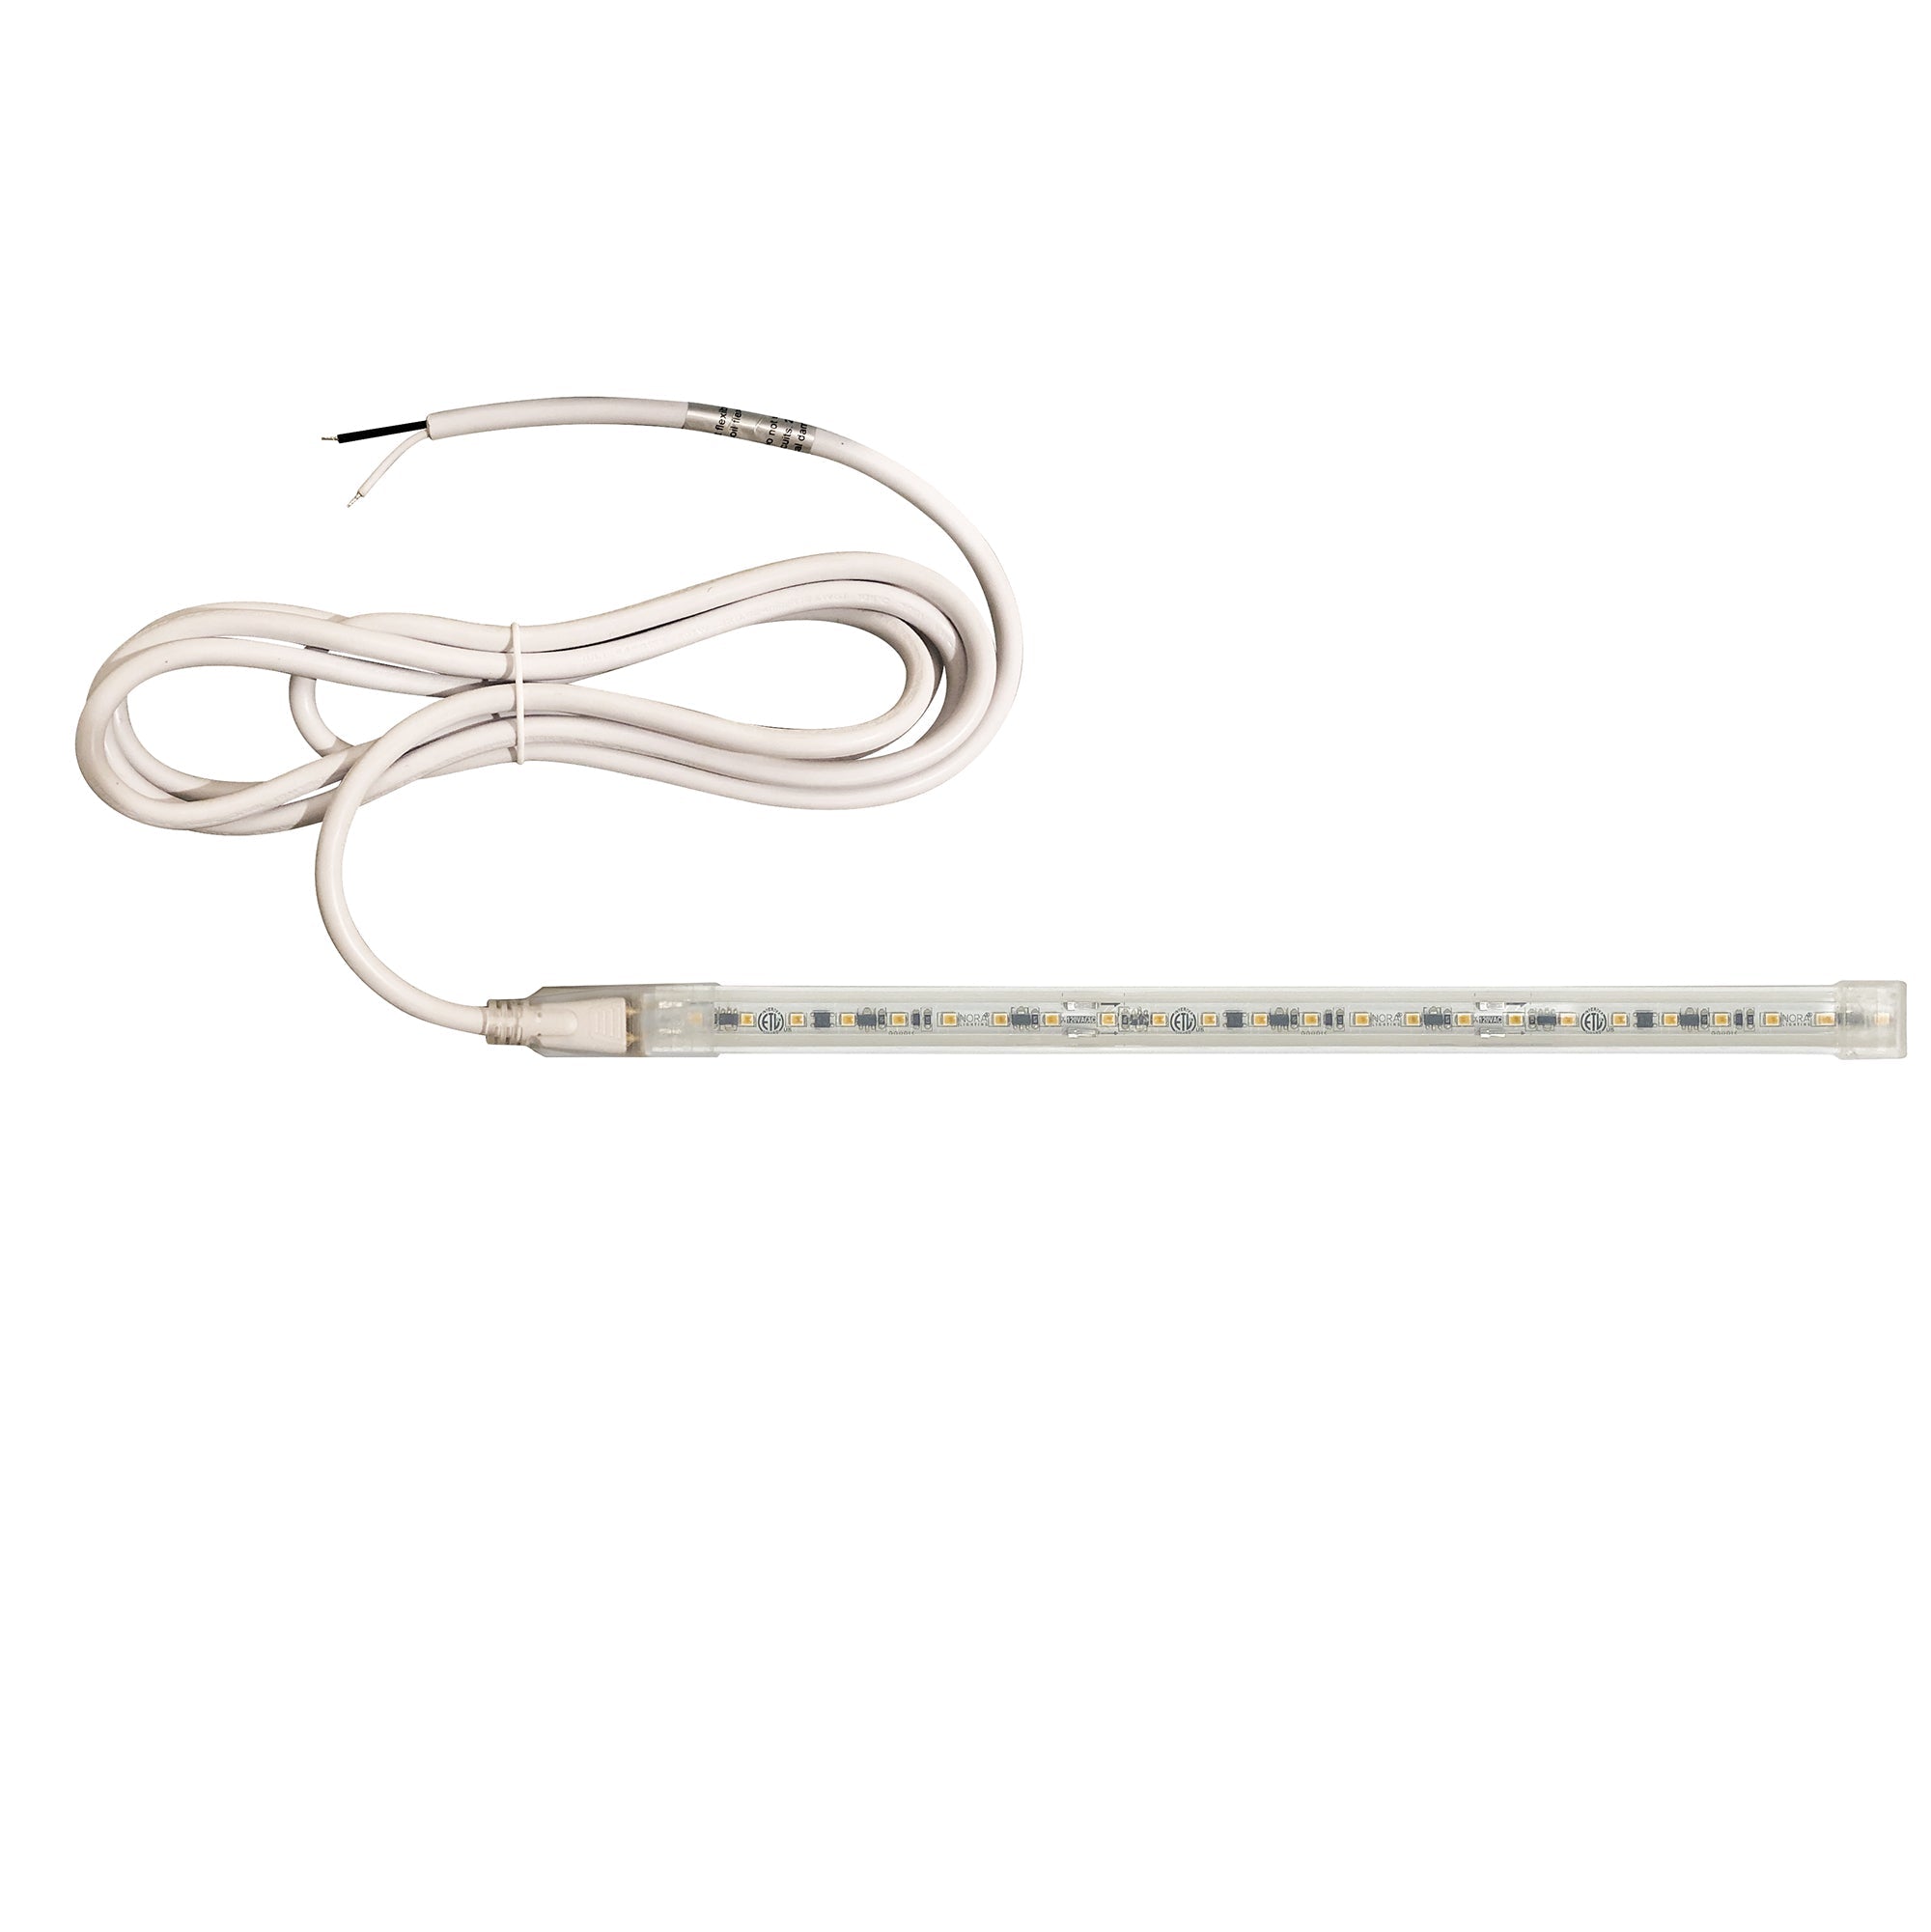 Nora Lighting NUTP13-W61-4-12-930/HW - Accent / Undercabinet - Custom Cut 61-ft, 4-in 120V Continuous LED Tape Light, 330lm / 3.6W per foot, 3000K, w/ Mounting Clips and 8' Hardwired Power Cord